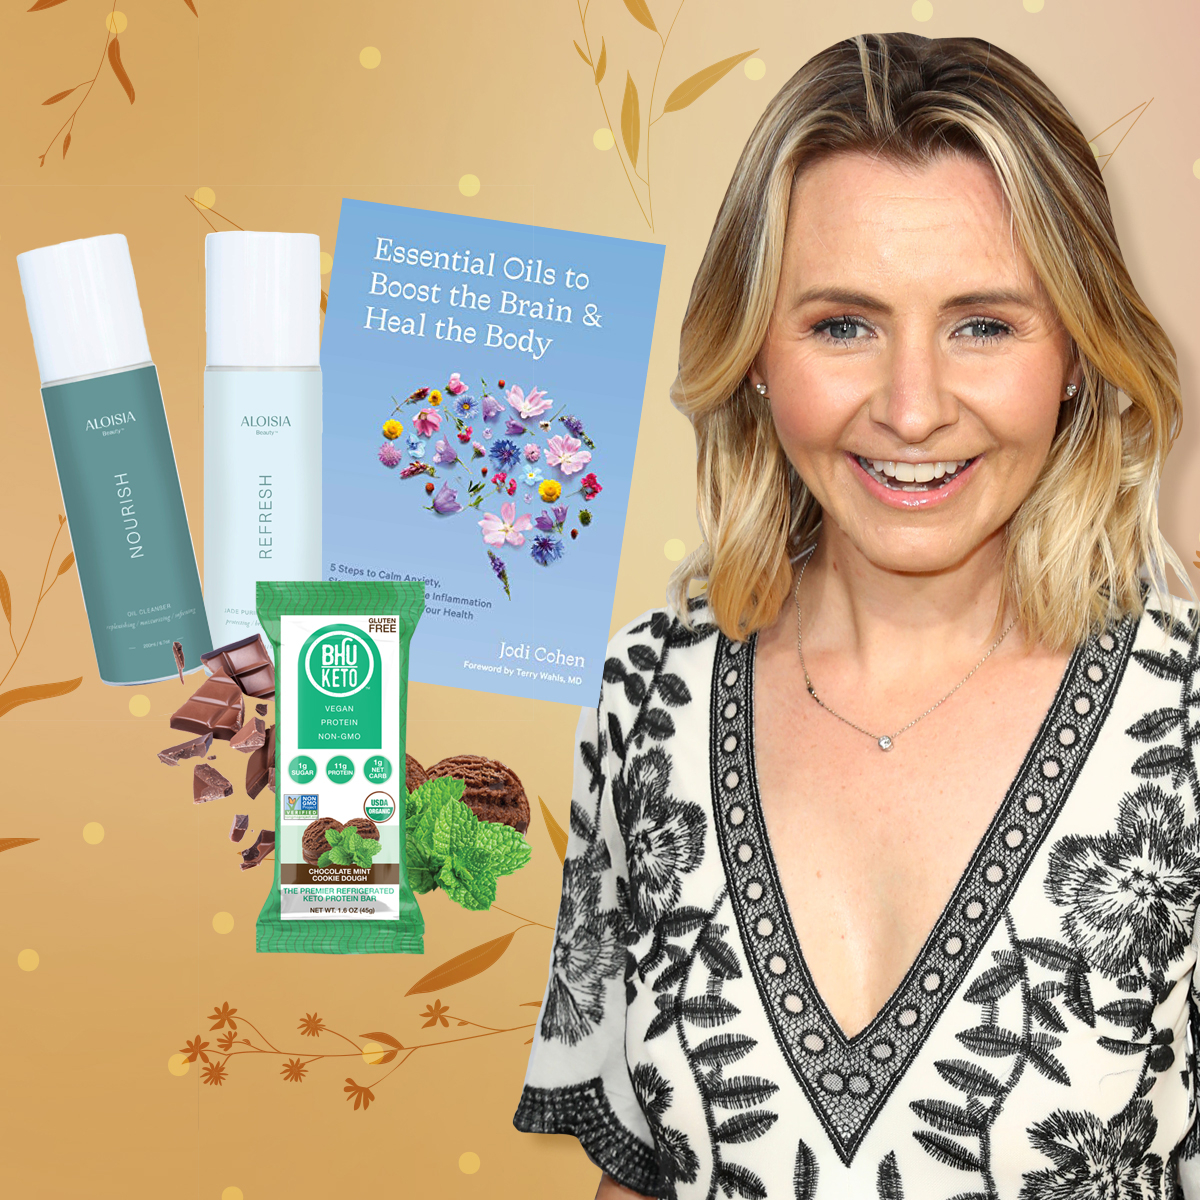 Beverley Mitchell - It's new year and time for a little pampering